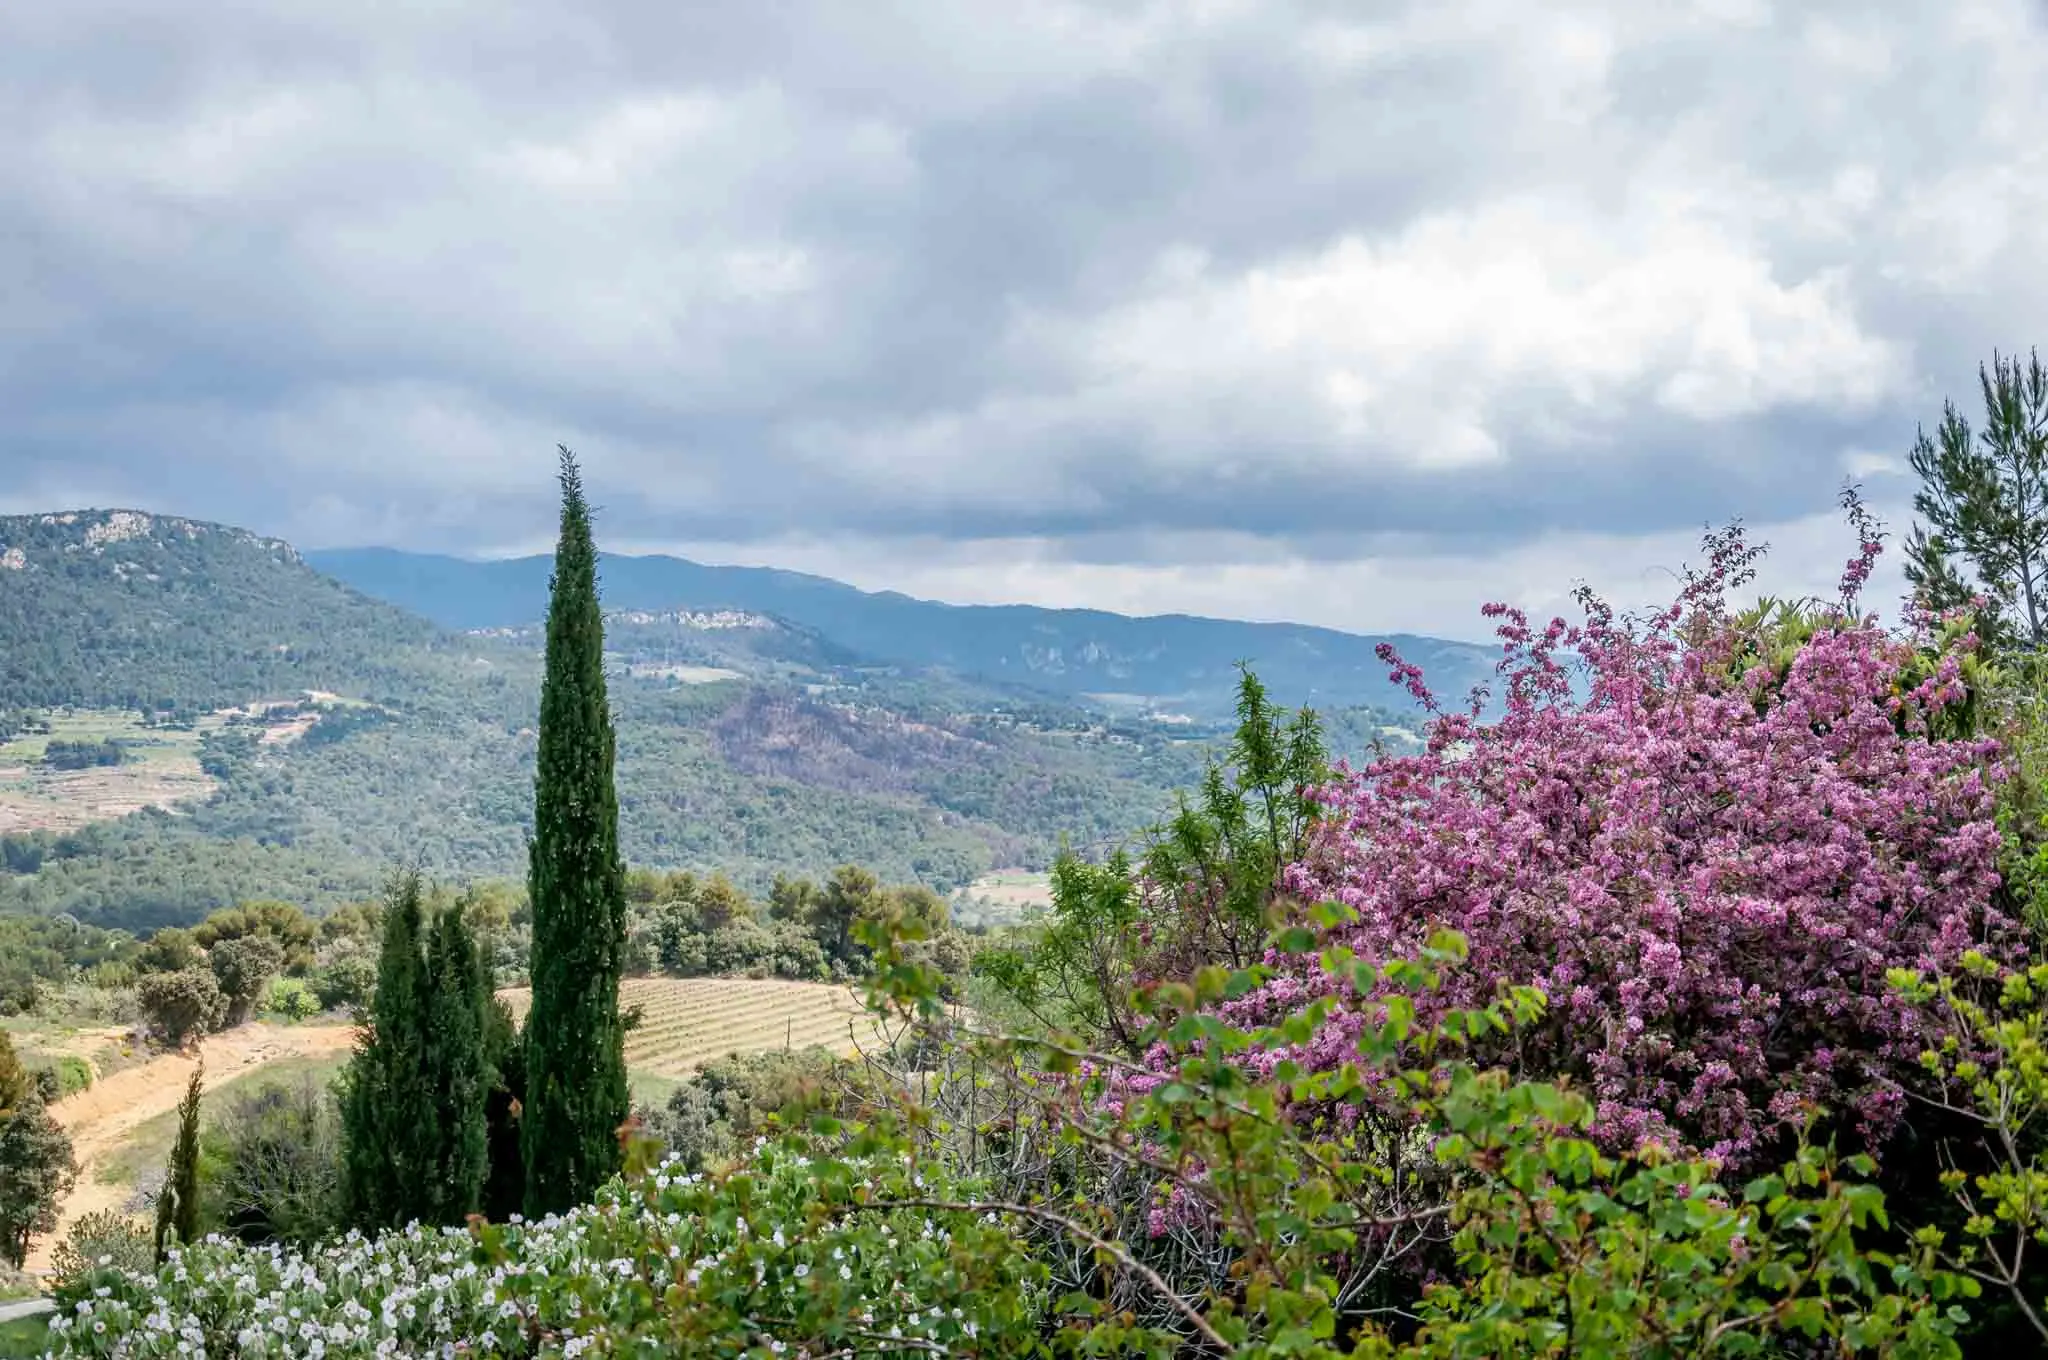 Mountains, trees, and flowers of  the Cotes du Rhone valley